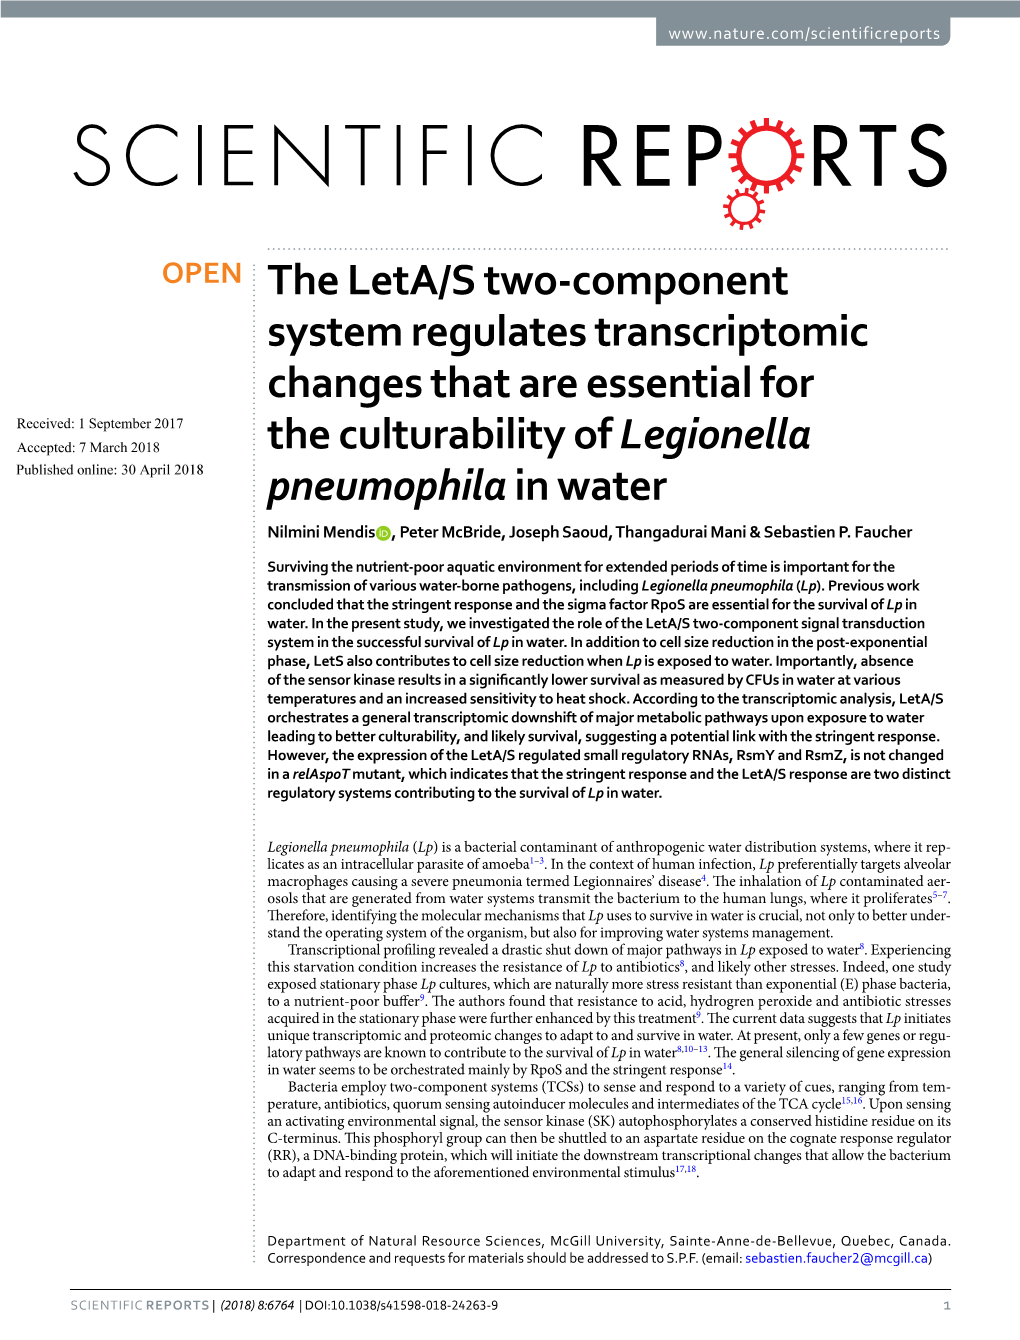 The Leta/S Two-Component System Regulates Transcriptomic Changes